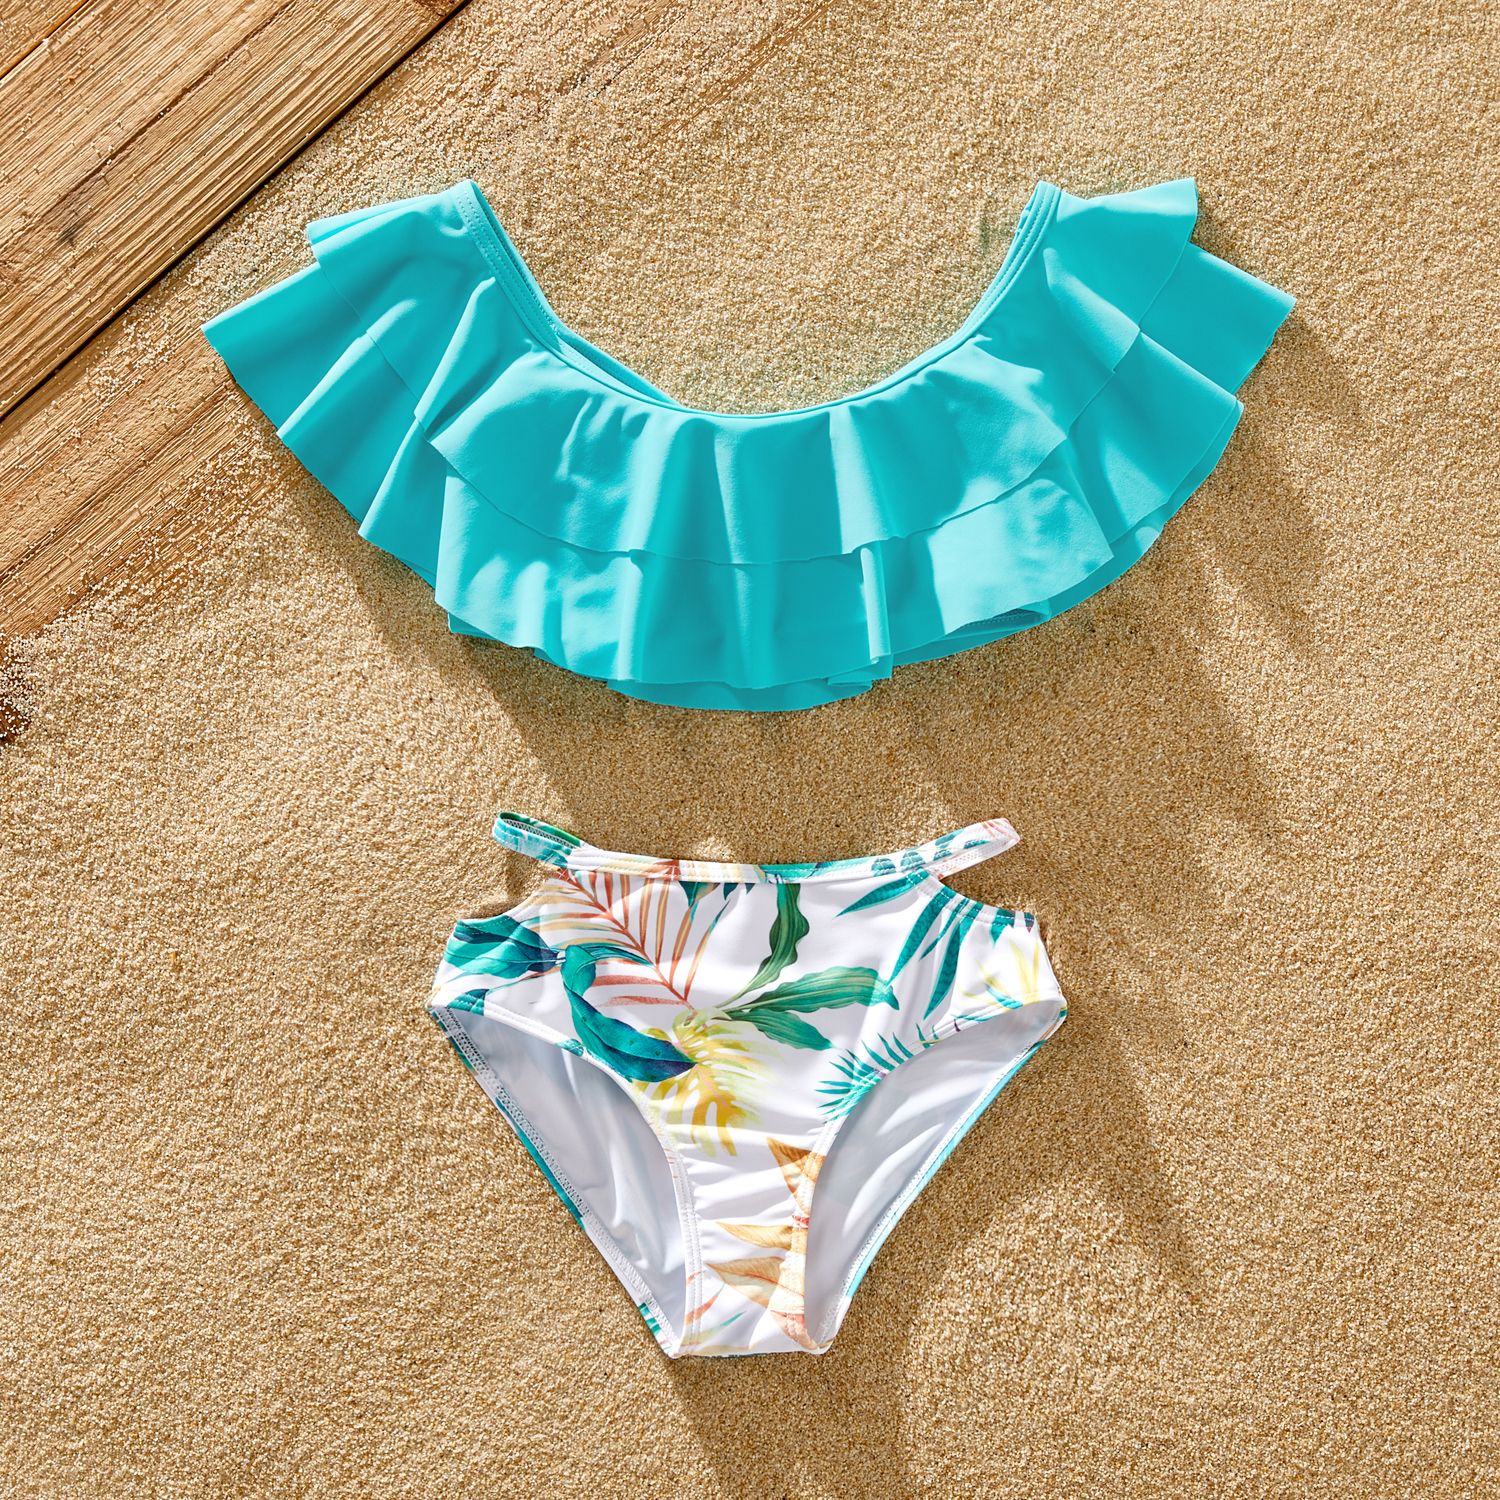 Family Matching Tropical Plant Print Ruffled Two-piece Swimsuit Or Swim Trunks Shorts